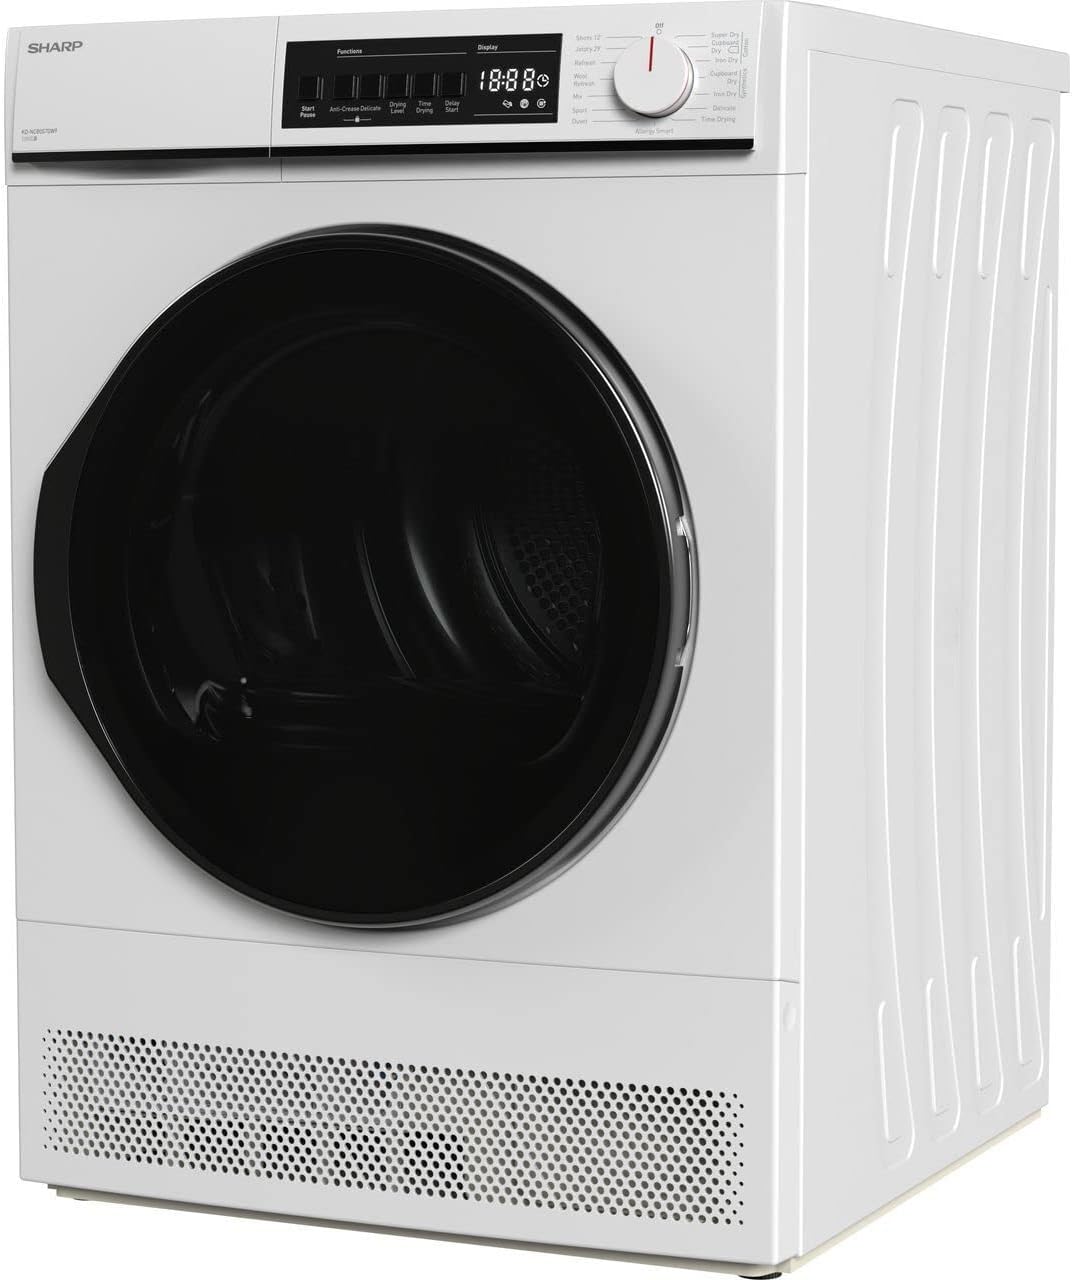 Sharp KD - NCB0S7GW9 10Kg Condenser Tumble Dryer - White - B Rated - Amazing Gadgets Outlet